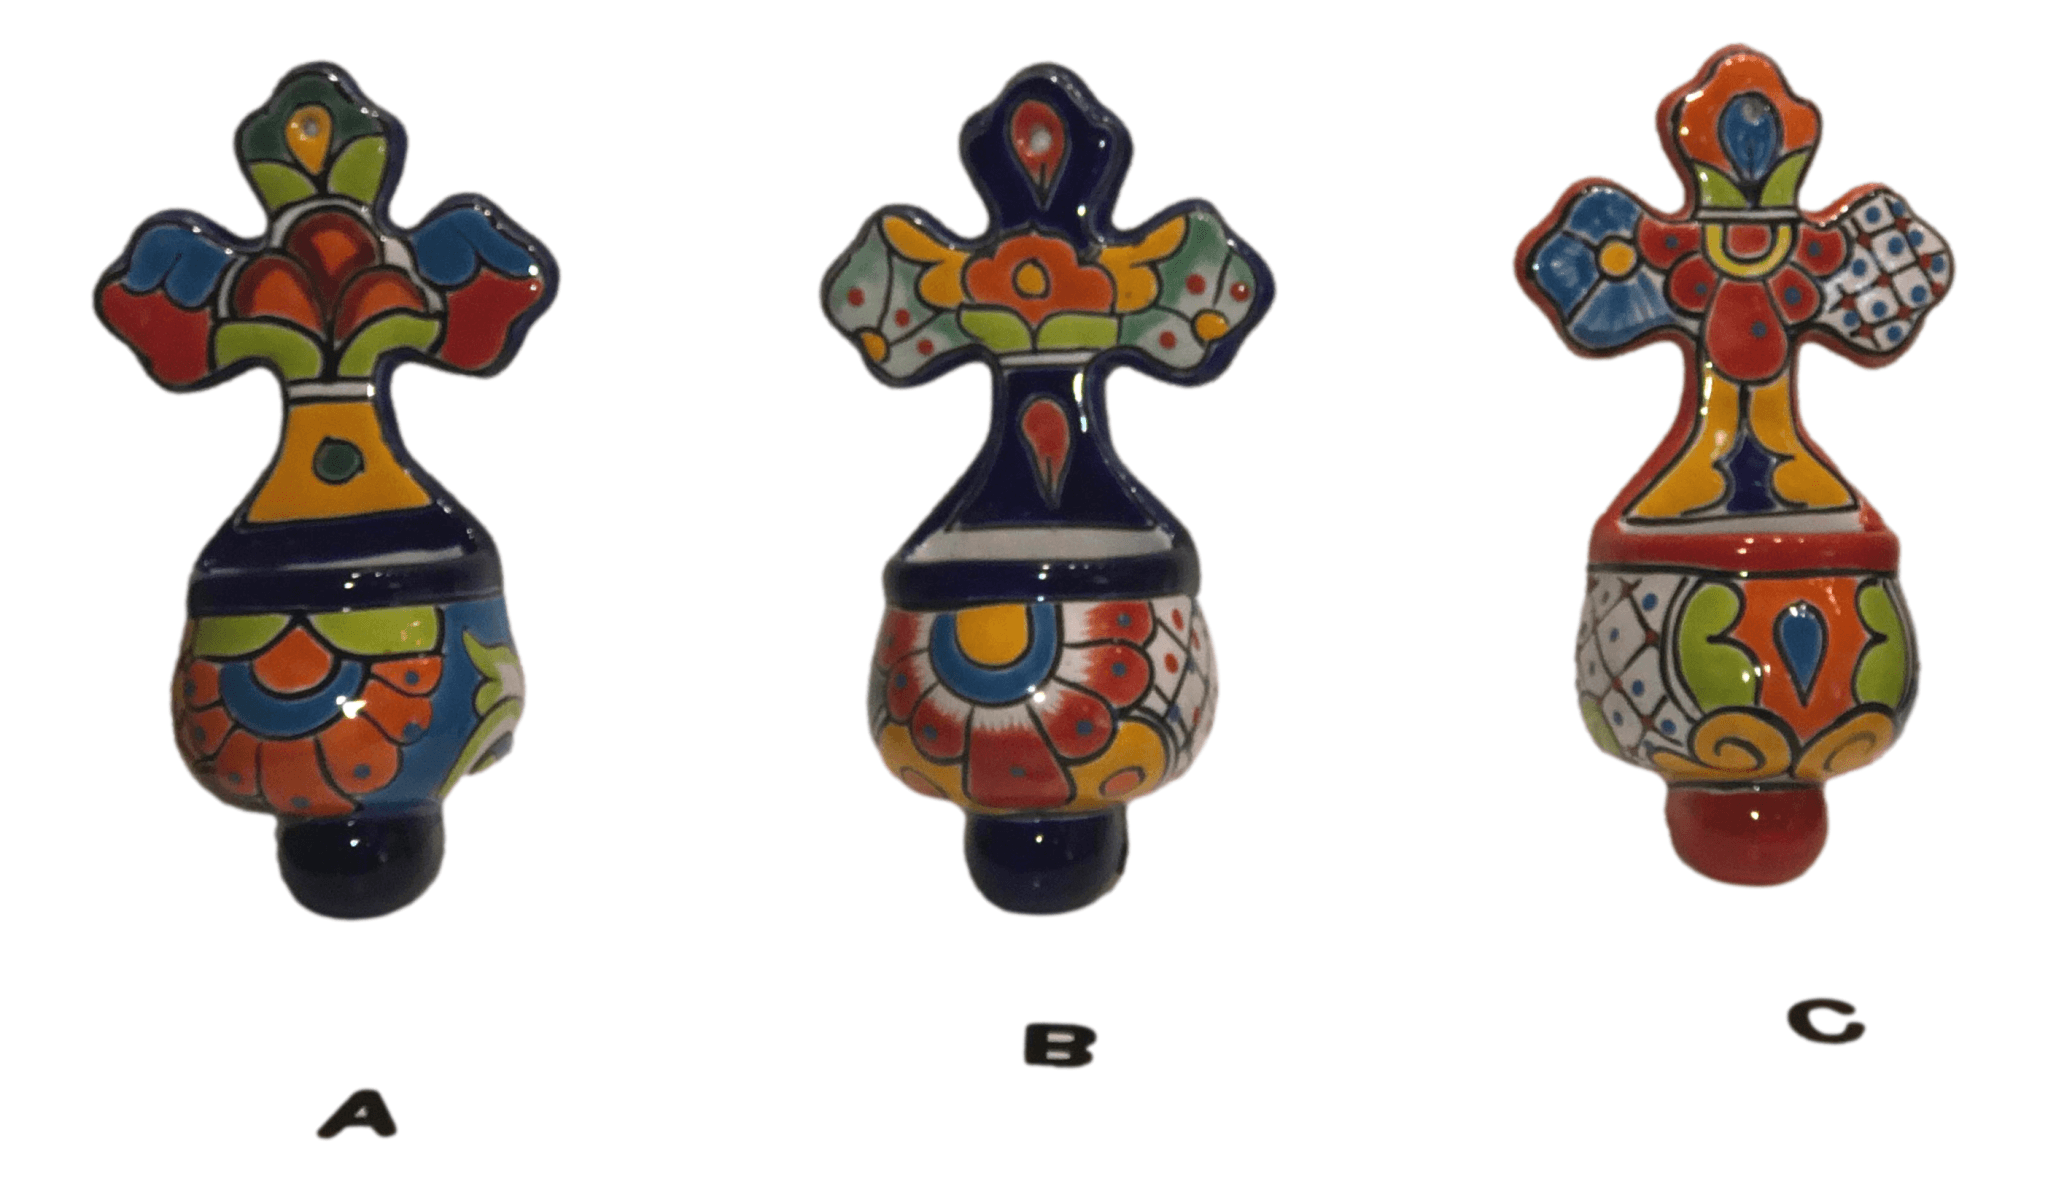 Talavera Cross Holy Water Font Large Handcrafted By Skilled Mexican Artisans L: 10.5 inches X W: 6 inches - Ysleta Mission Gift Shop- VOTED 2022 El Paso's Best Gift Shop